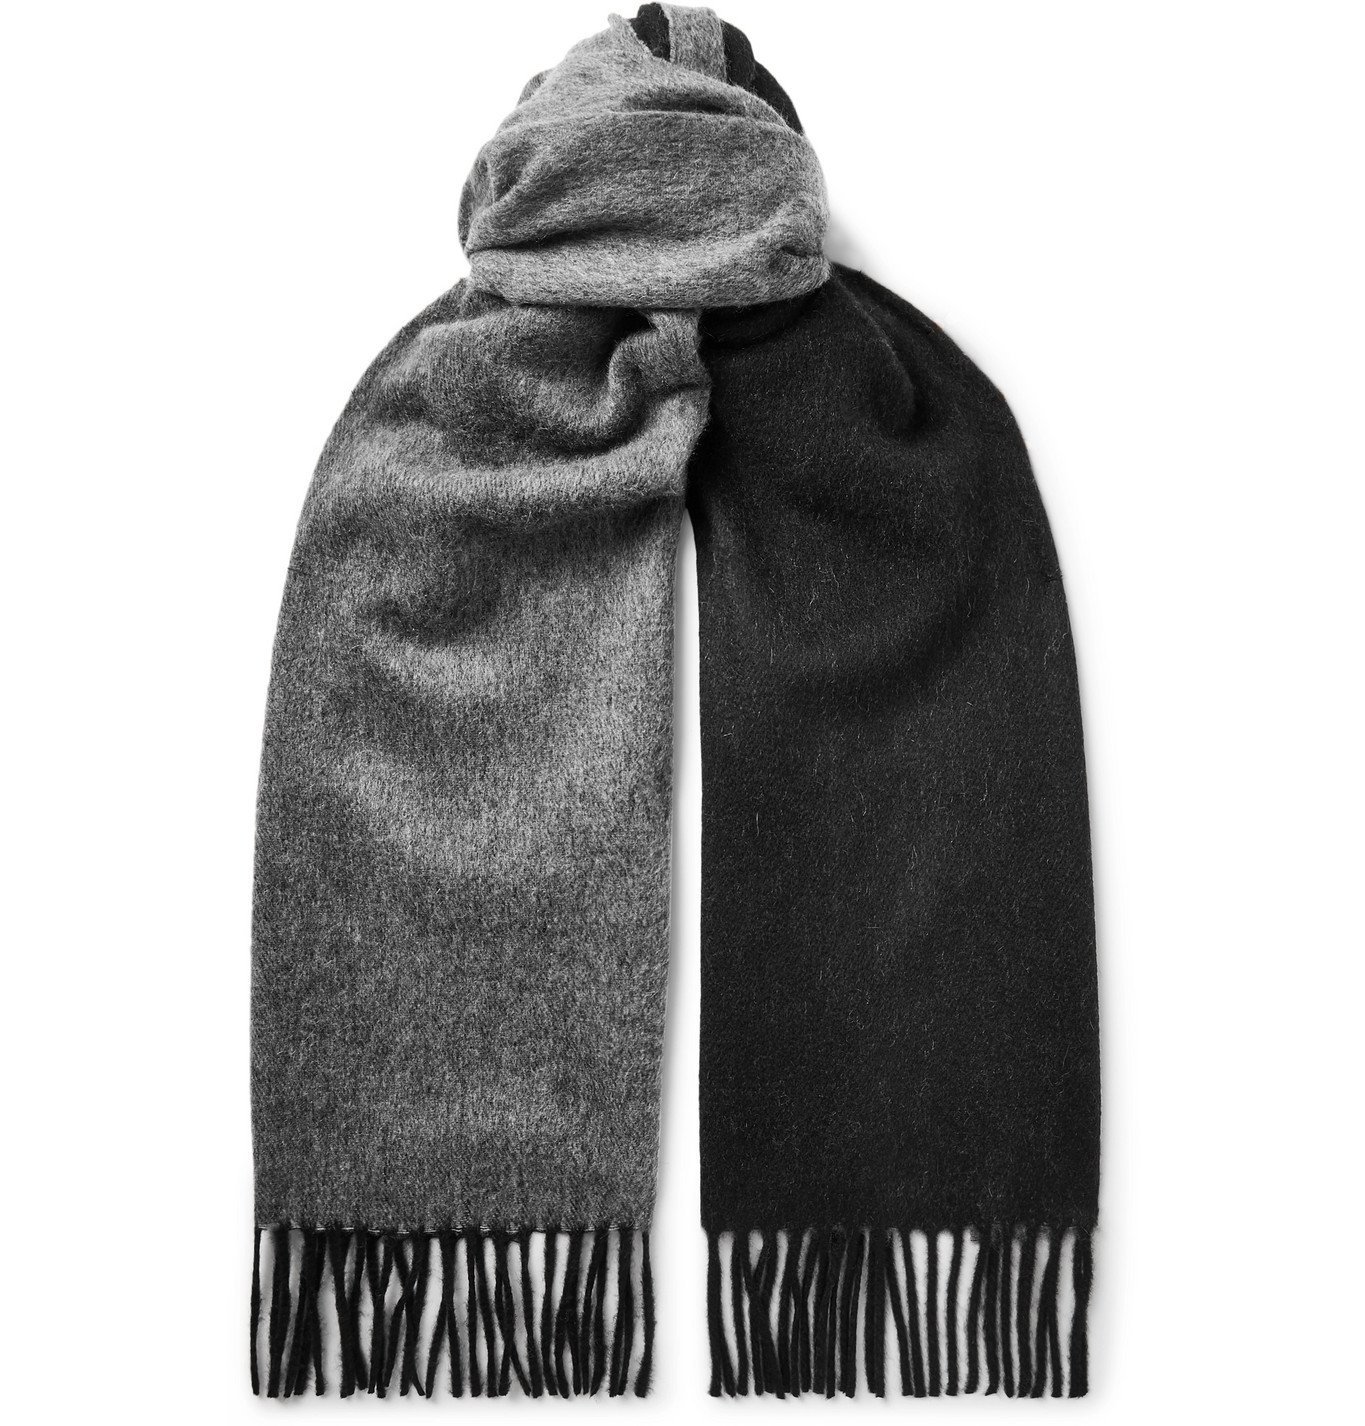 TOM FORD - Fringed Two-Tone Double-Faced Cashmere Scarf - Gray TOM FORD